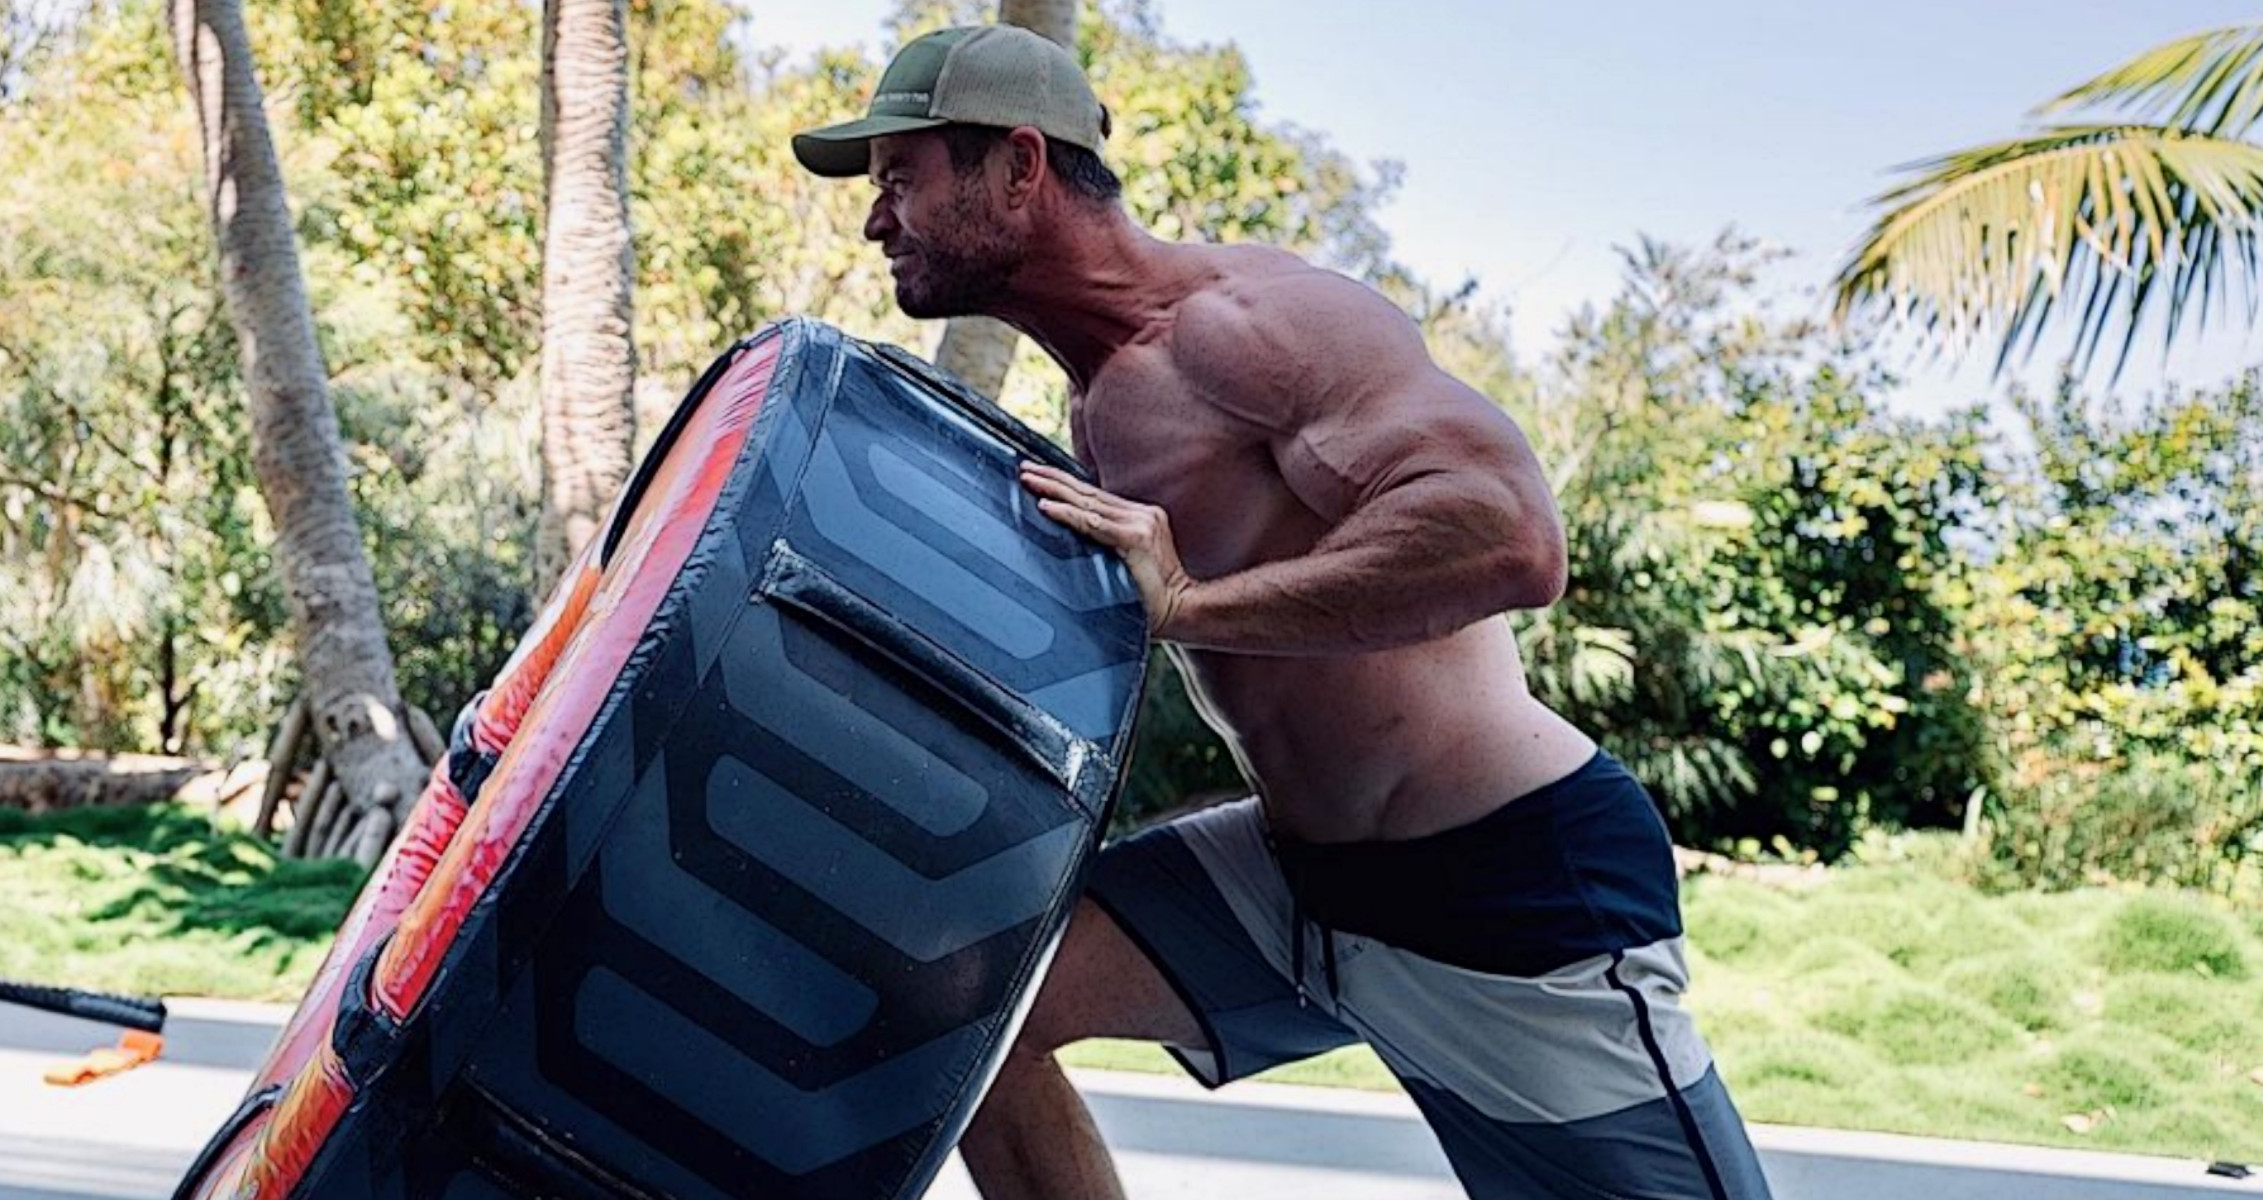 Chris Hemsworth Shares Insane 10 Minute Upper Body Workout To Add Muscle